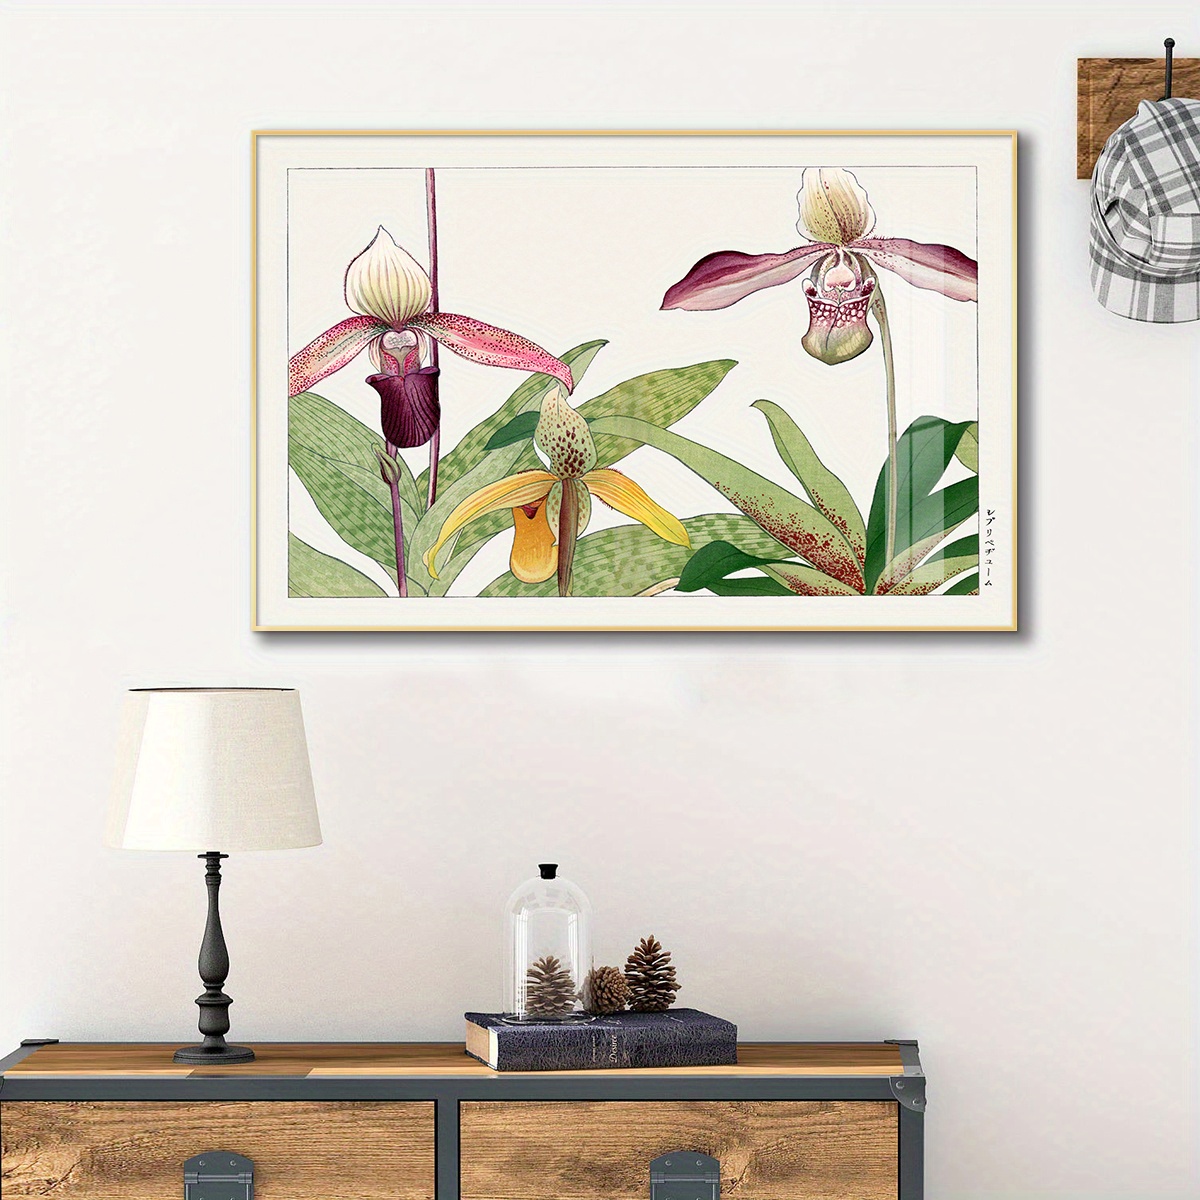 1pc botanical orchids metal framed canvas painting modern minimalist floral wall art waterproof wooden back home office hotel cafe ktv bar wall decor artistic room decor large size decorative picture